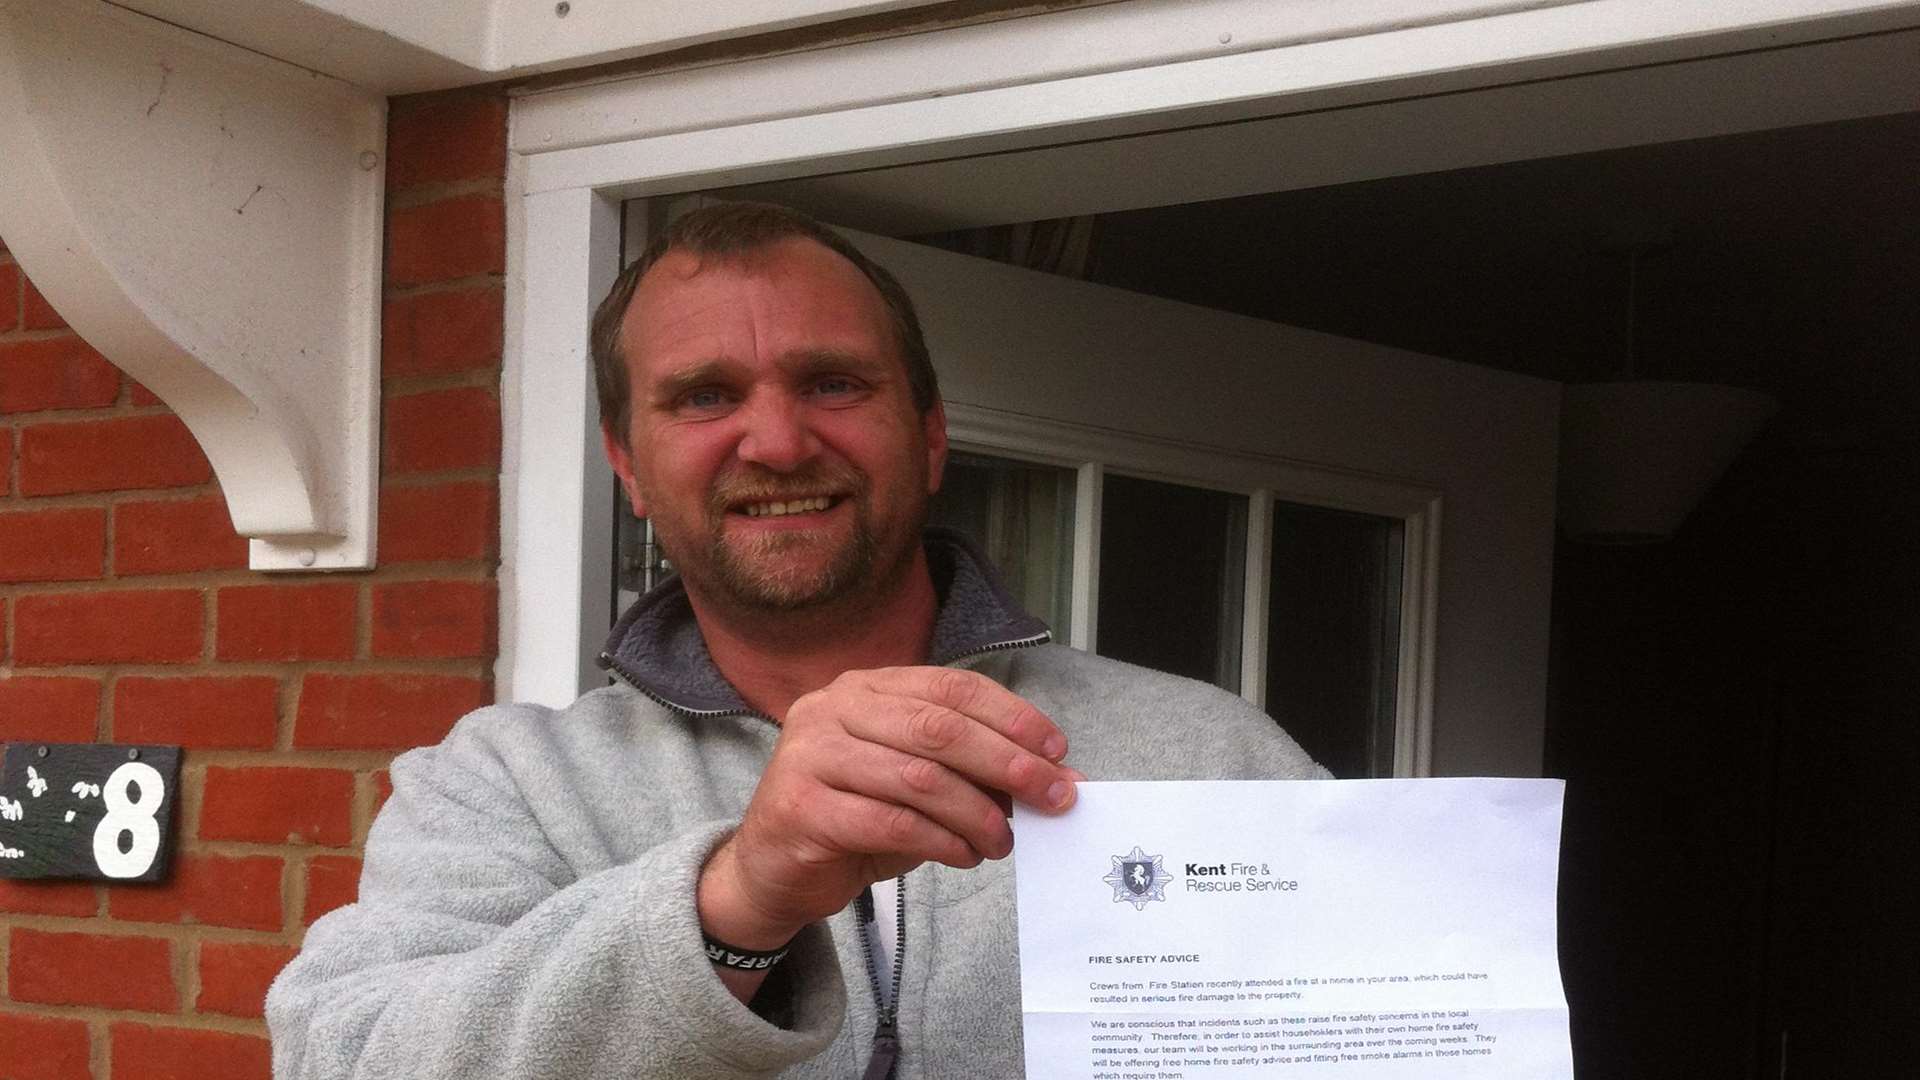 Alan Todd with the letter posted by firefighters